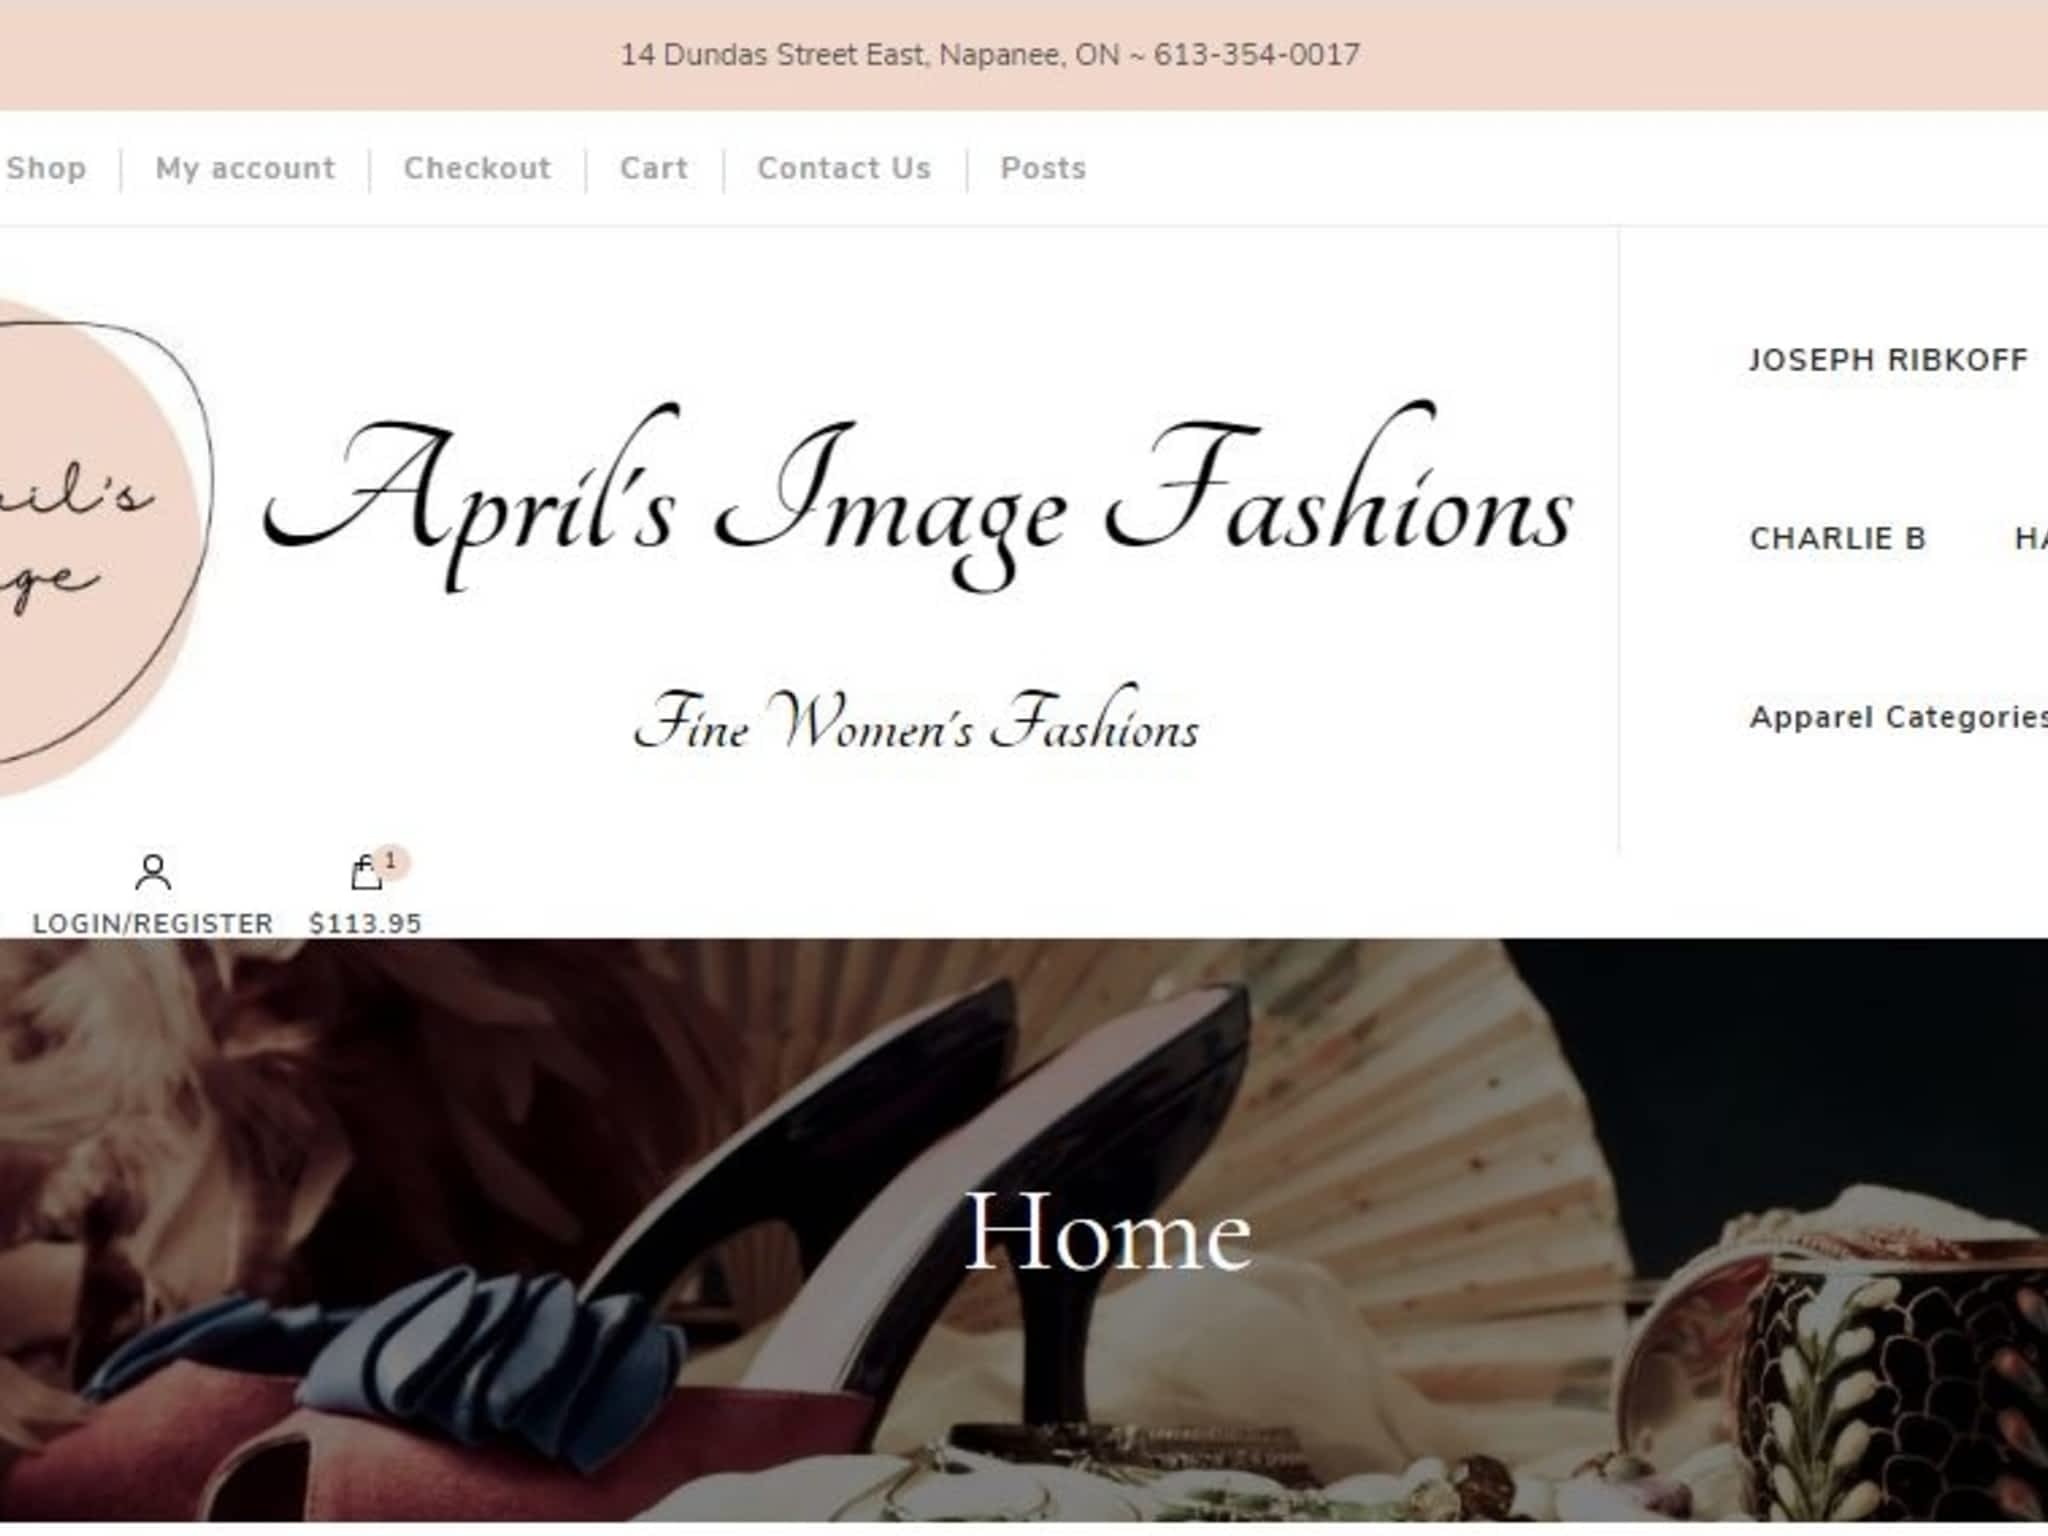 photo MTech Services Web Design For Small Business